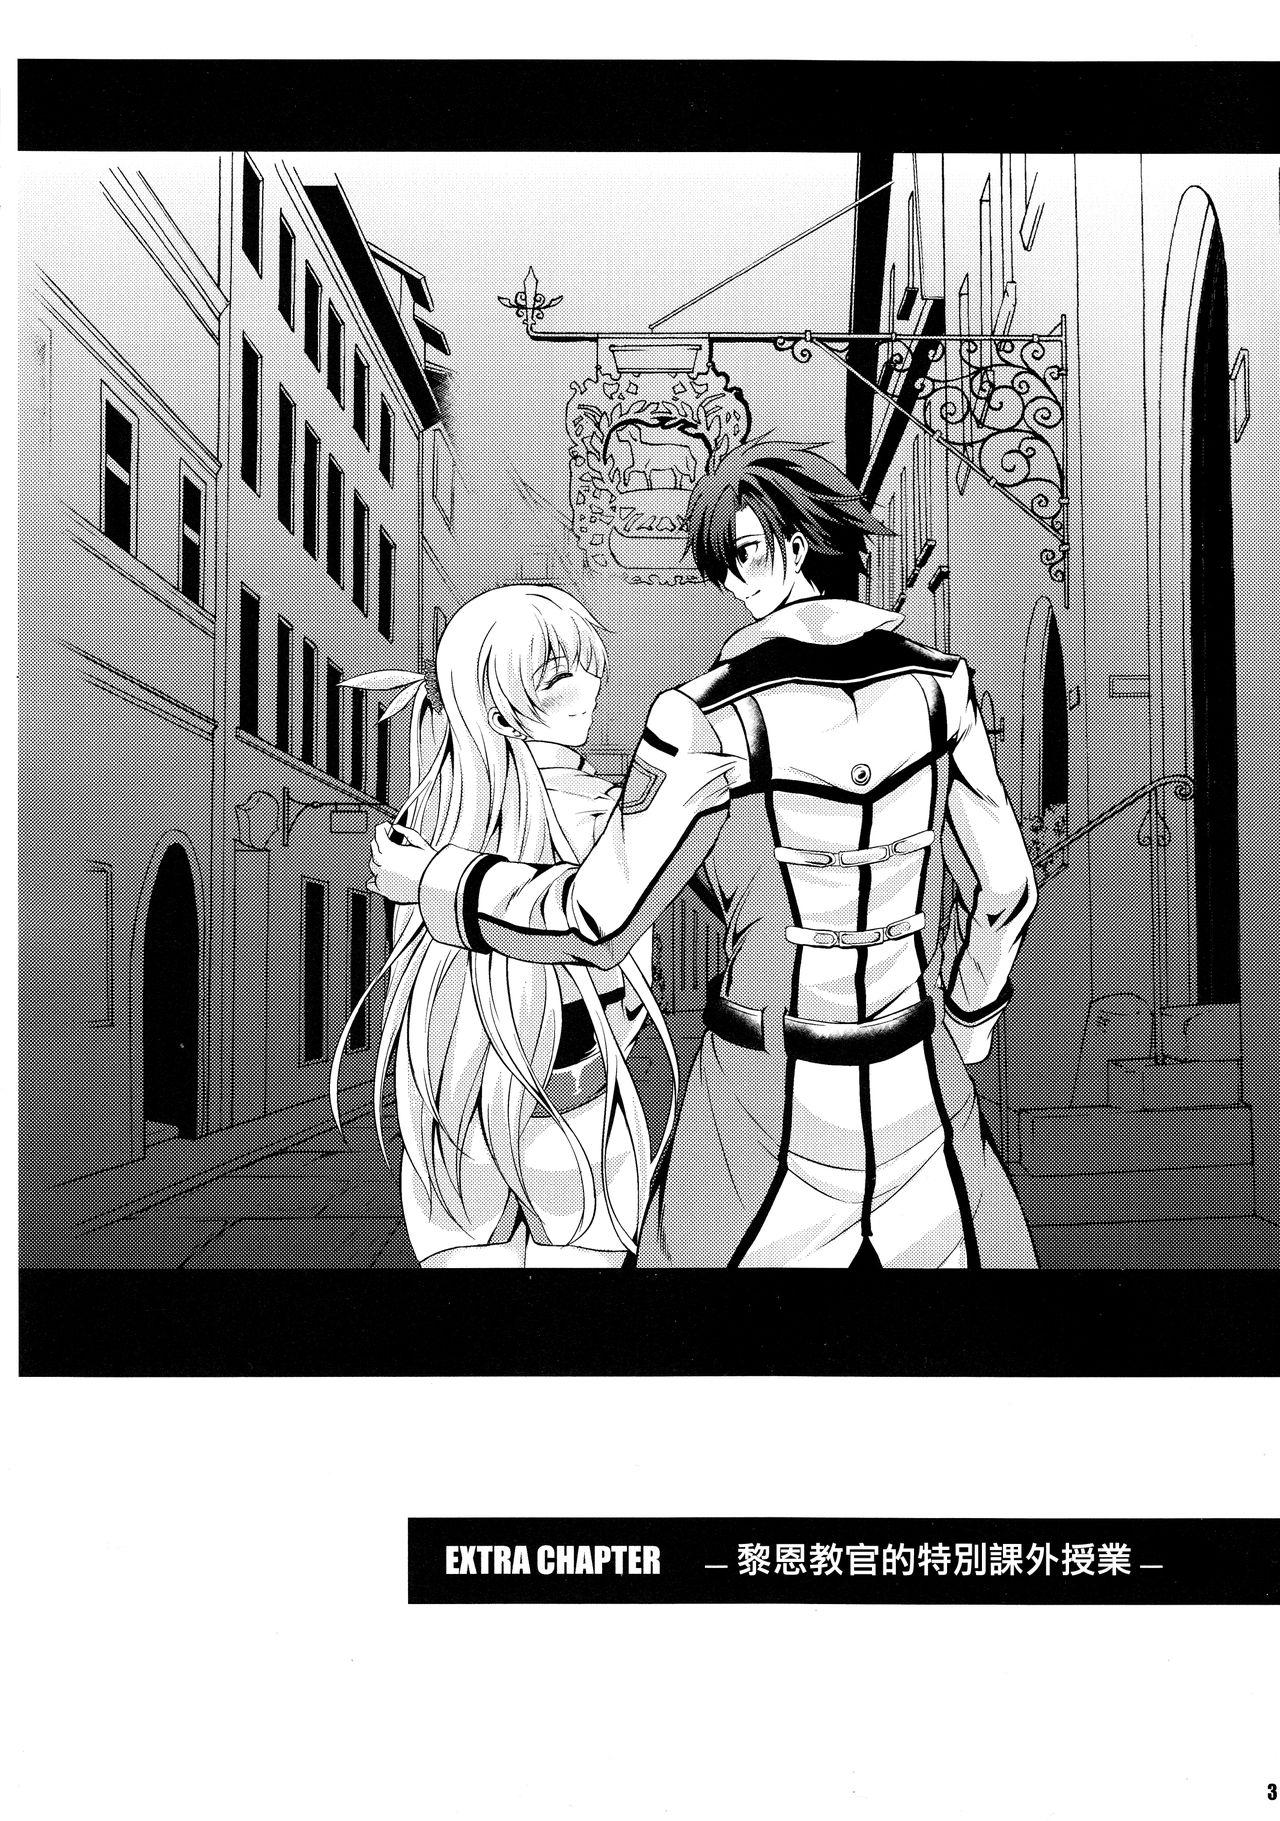 Pussylicking リィン教官の特別課外授業+メロン限定特典付 - The legend of heroes Tight - Page 2